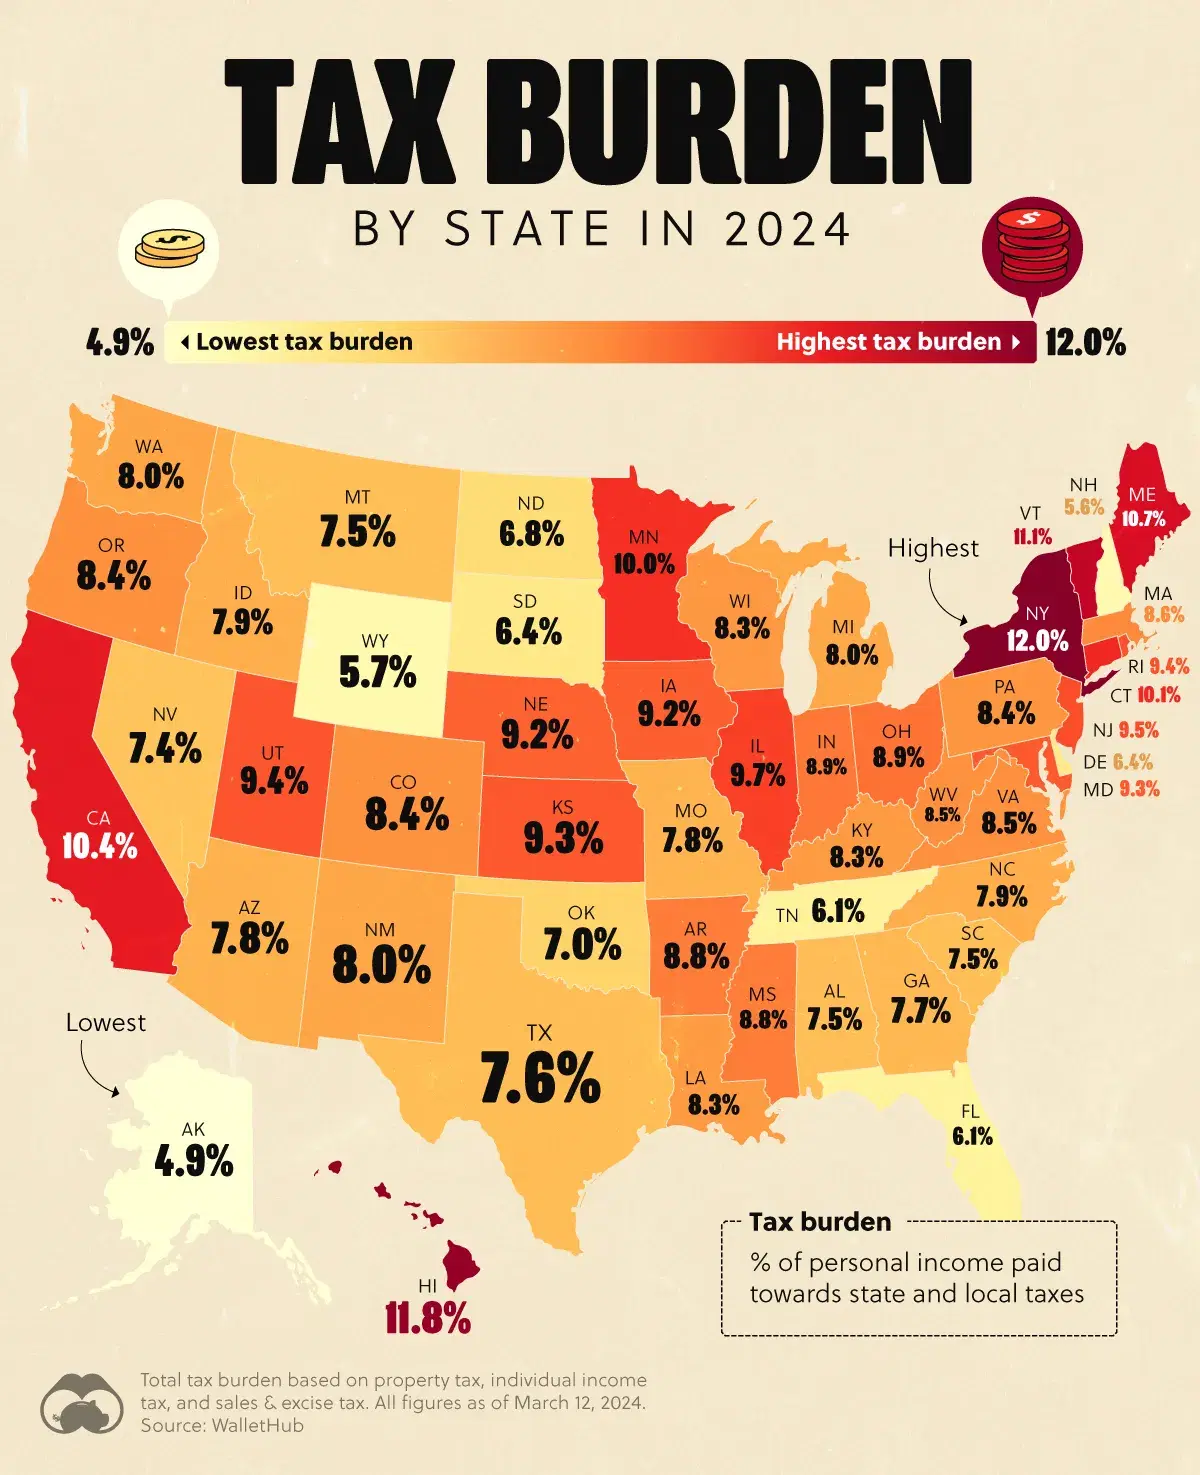 New York Has the Highest Tax Burden of Any State 🗽